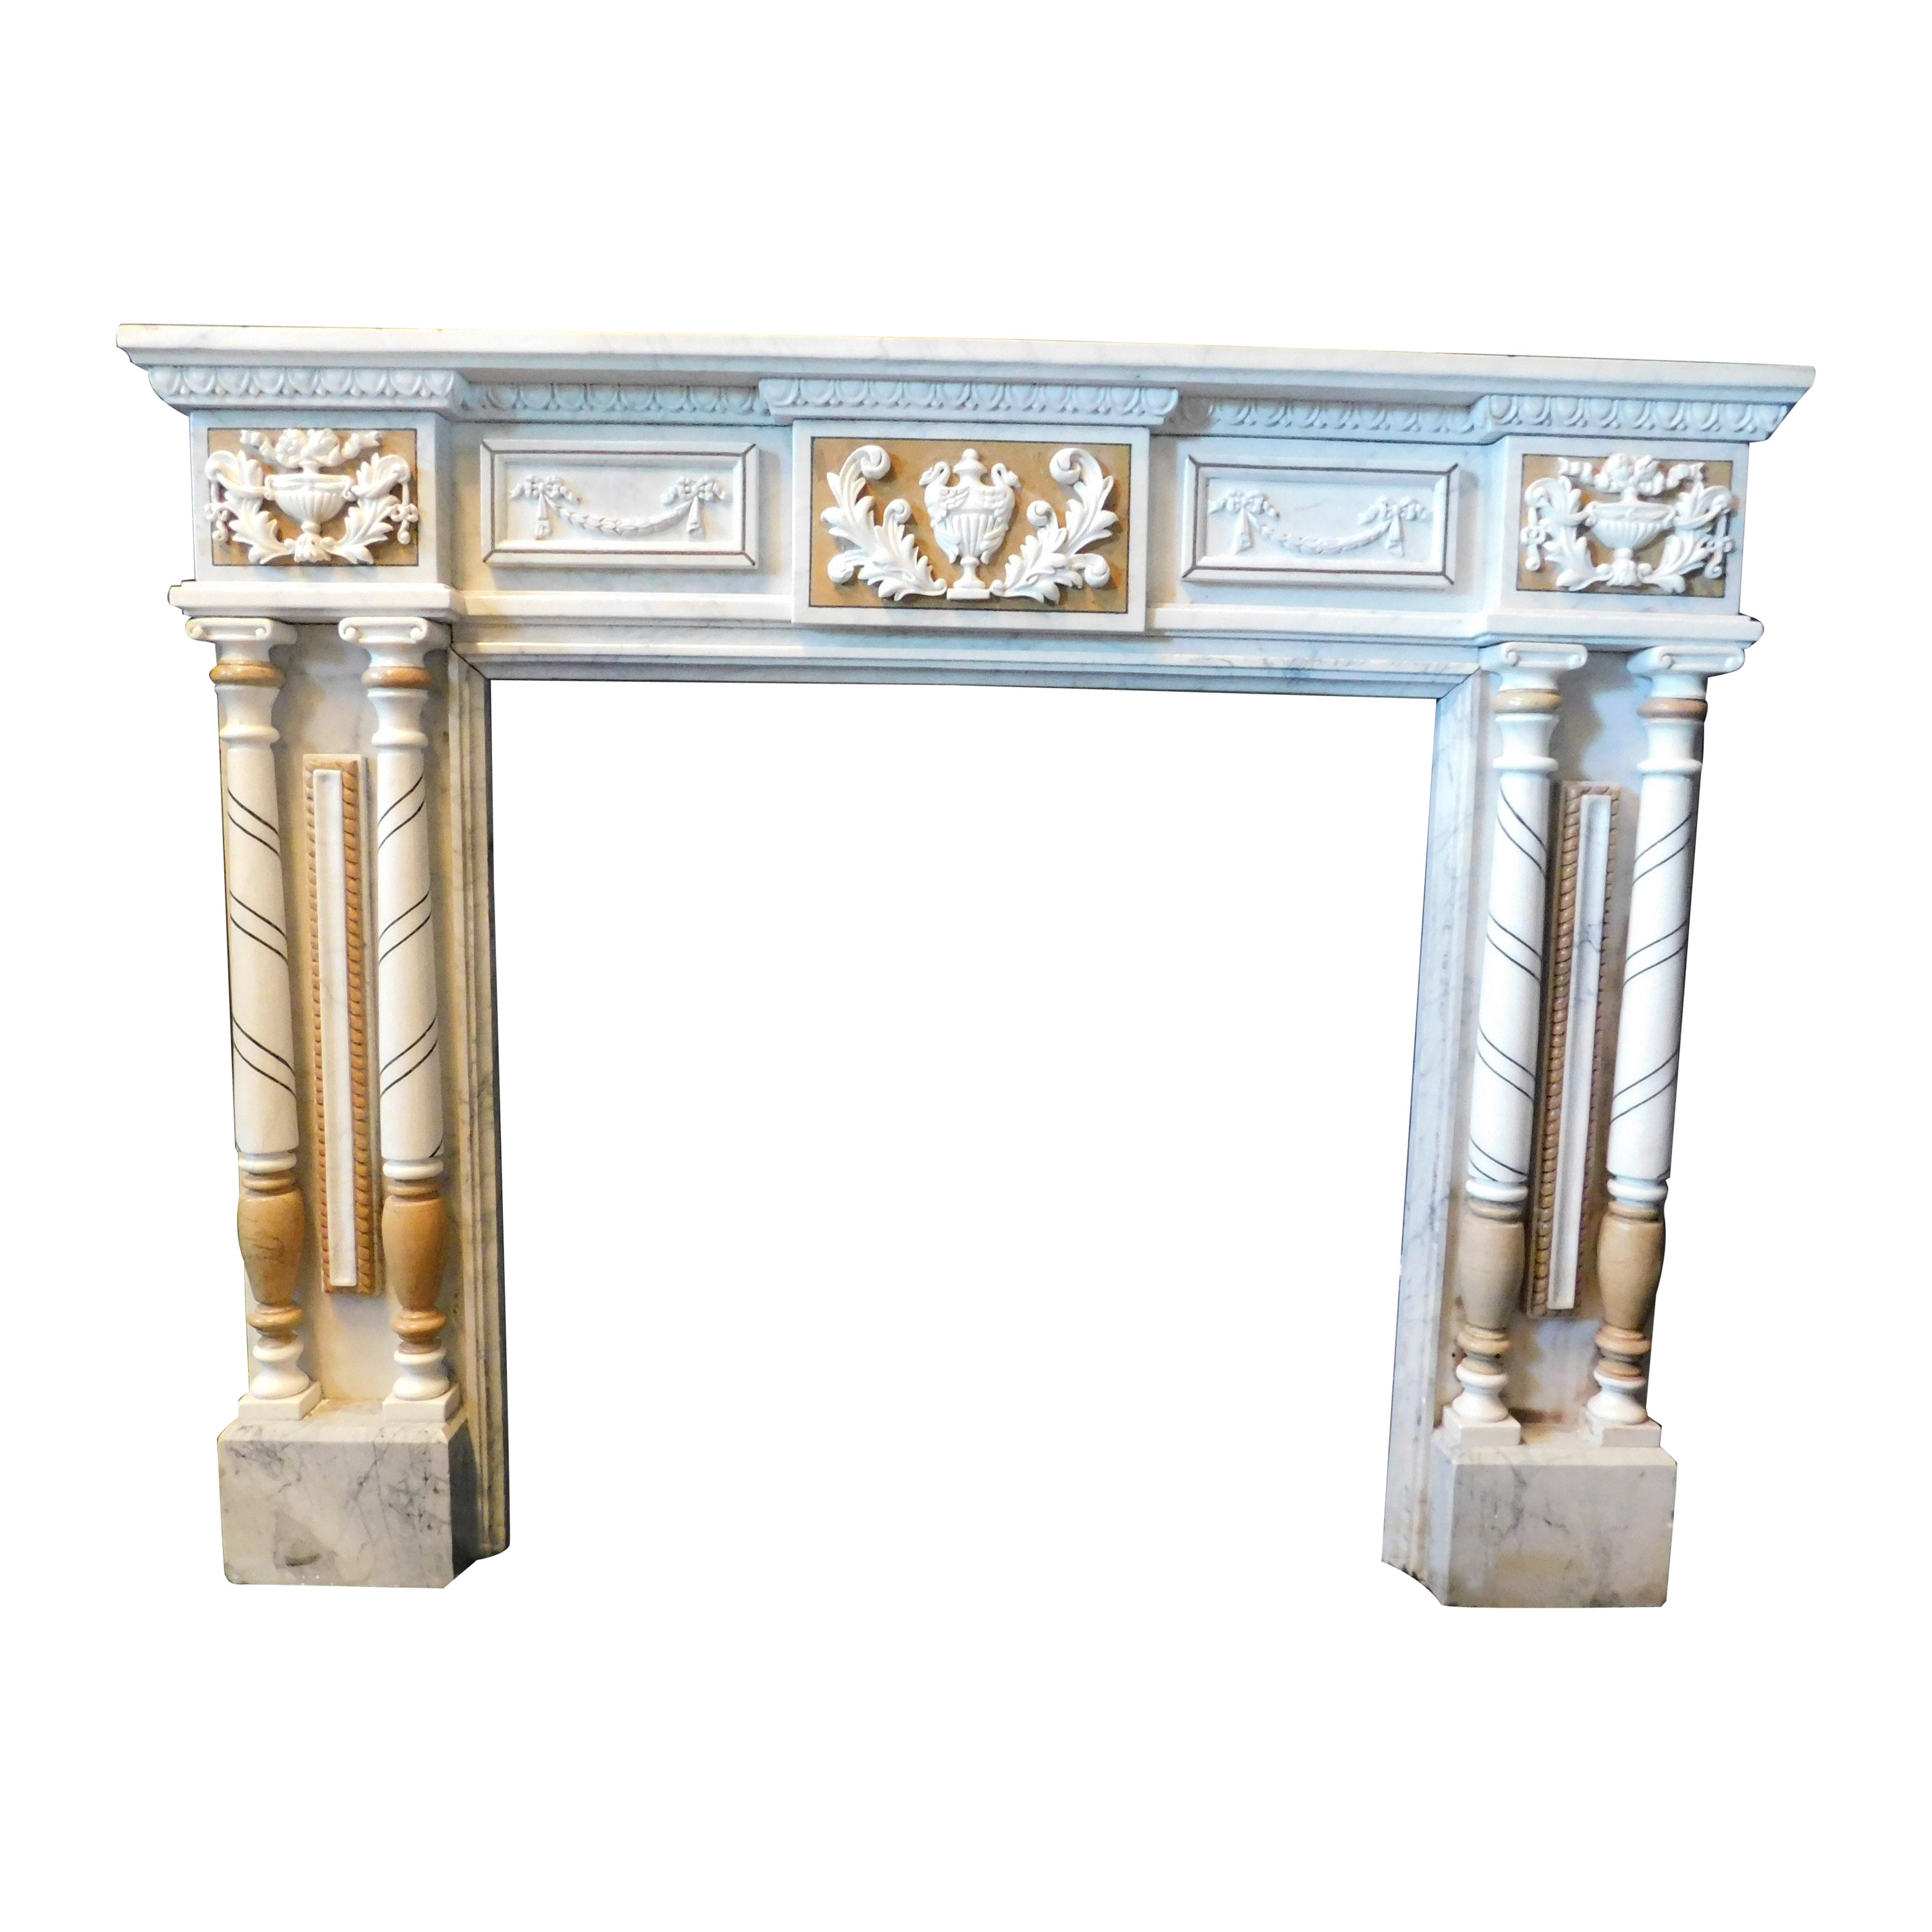 Vintage Fireplace in Carved and Inlaid White Marble, Early 1900s, Italy For Sale